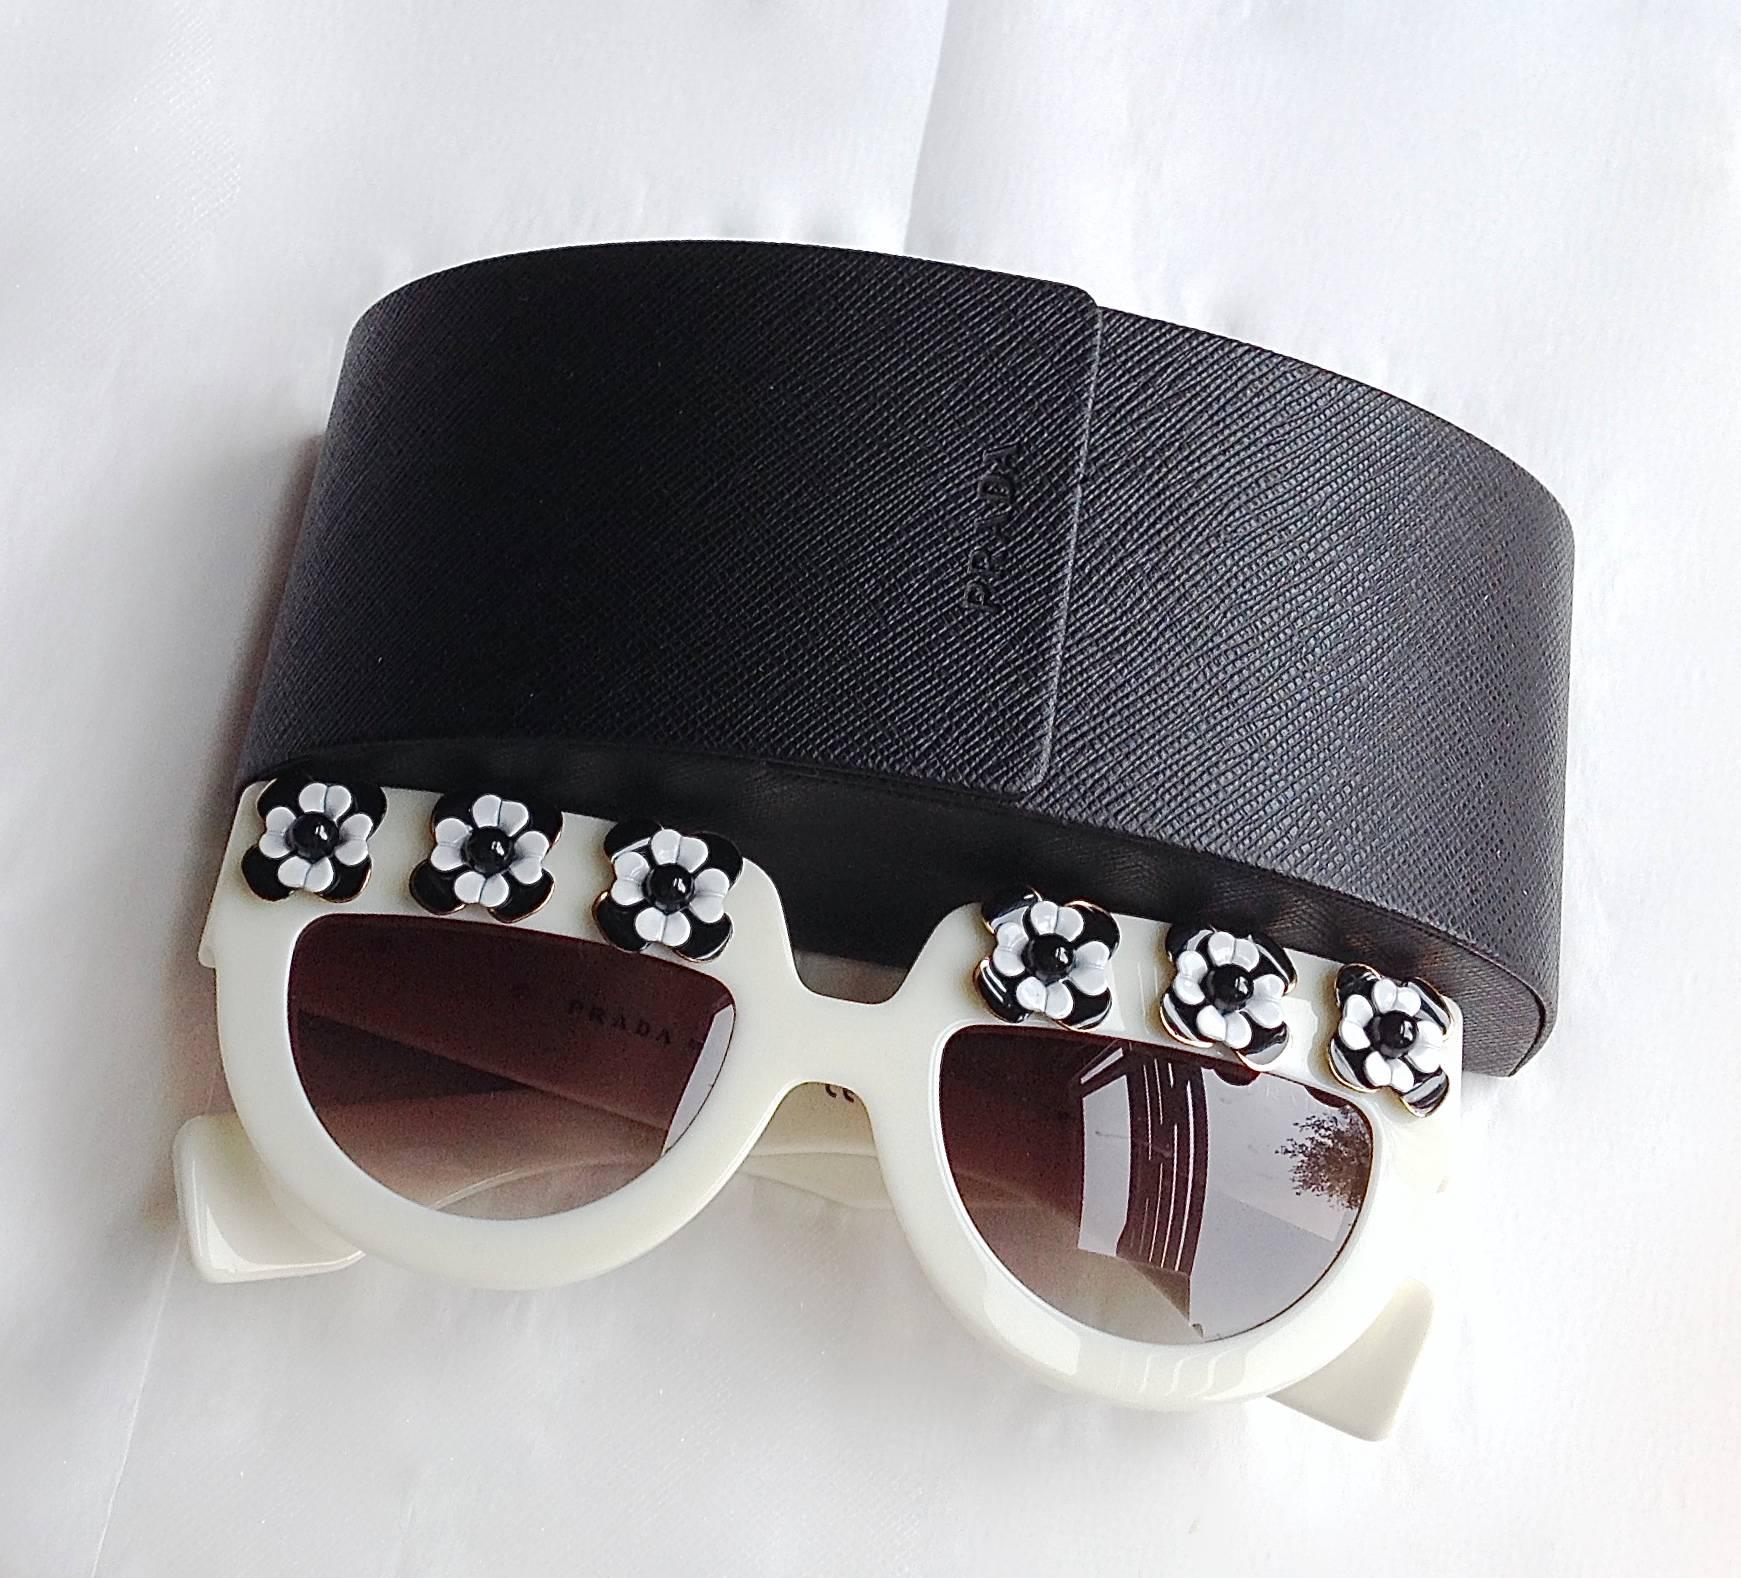 Authentic Prada 2012 runway handmade jewelled sunglasses. Adorned enamel glass flowers on bright ivory white frame. to make these sunglasses so chic and so fun !
Although they are not store fresh, but they never been worn in clean pristine